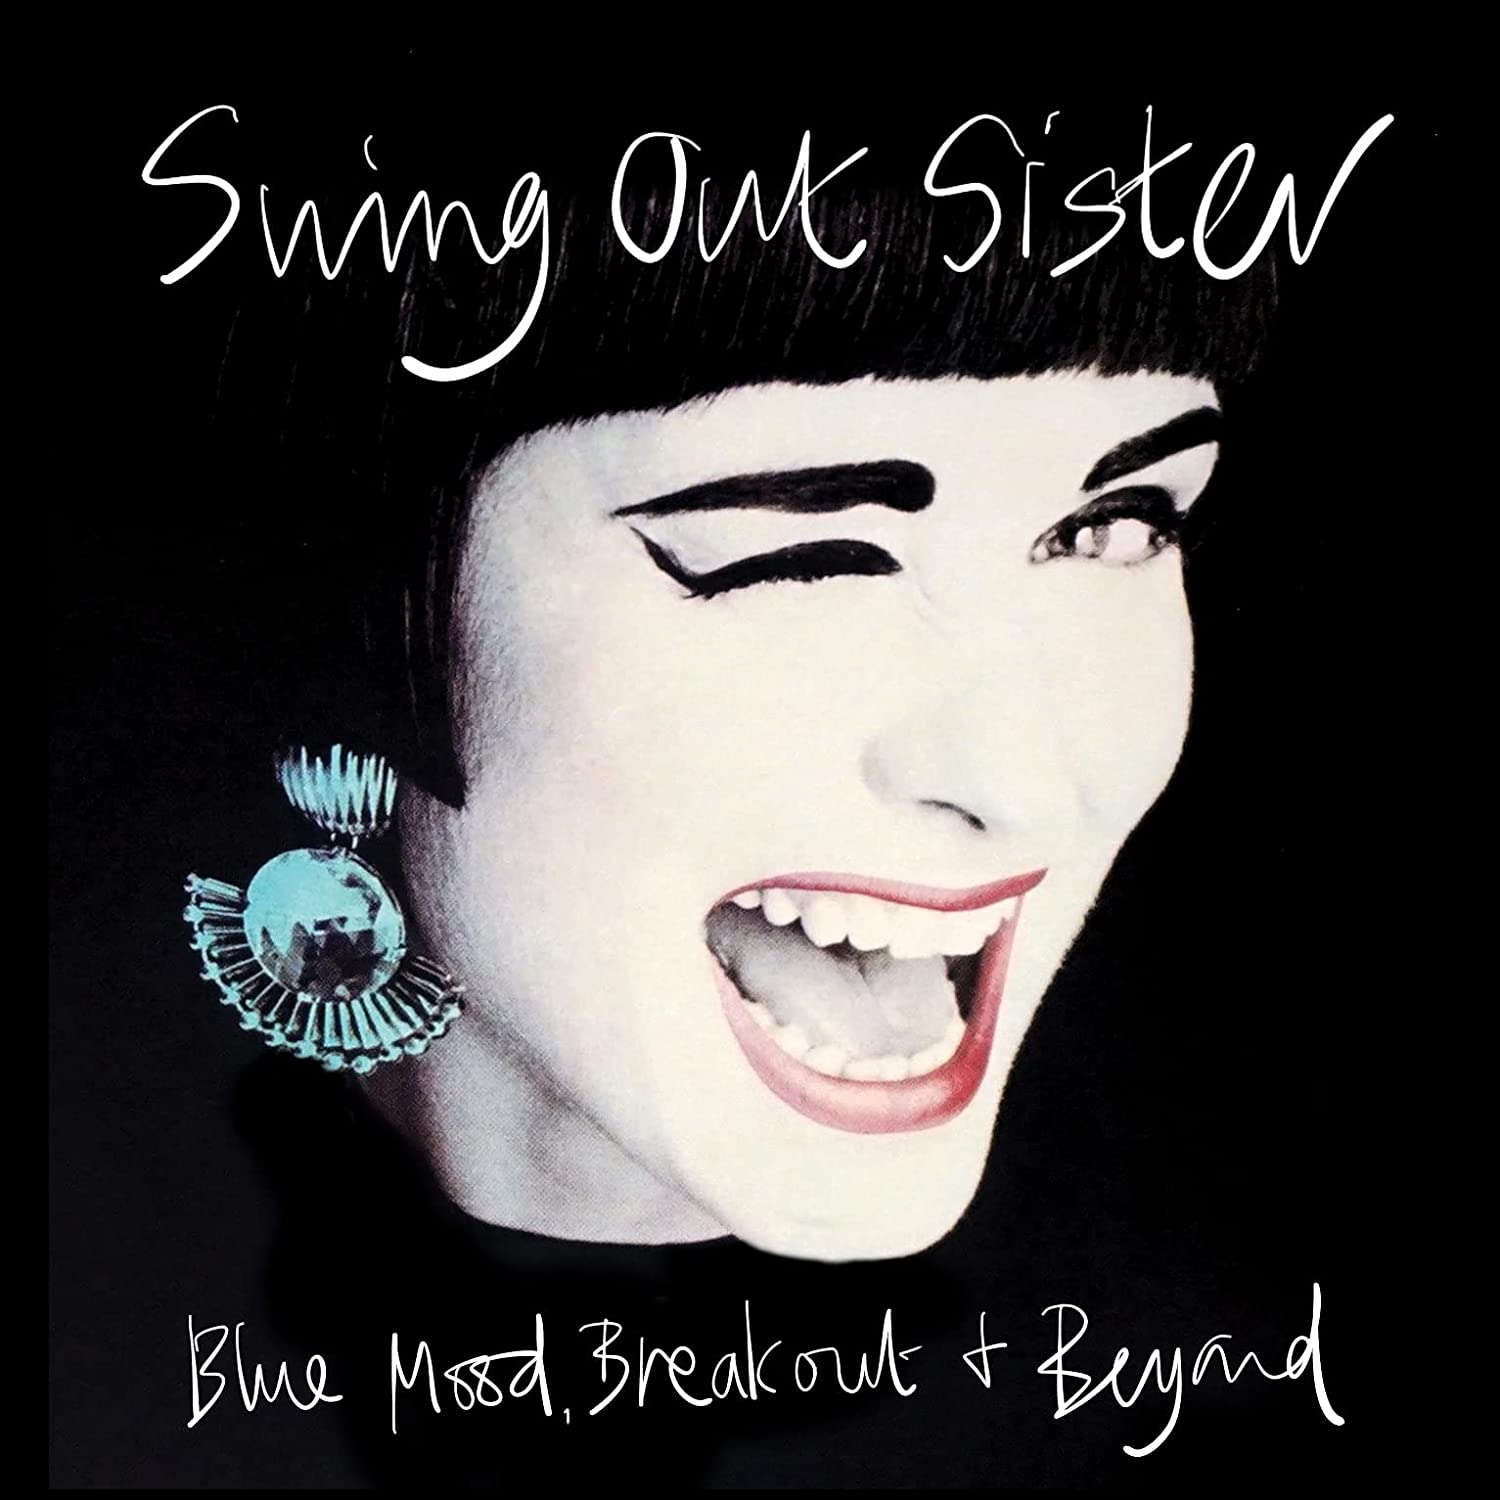 Swing Out Sister / Blue Mood, Breakout & Beyond